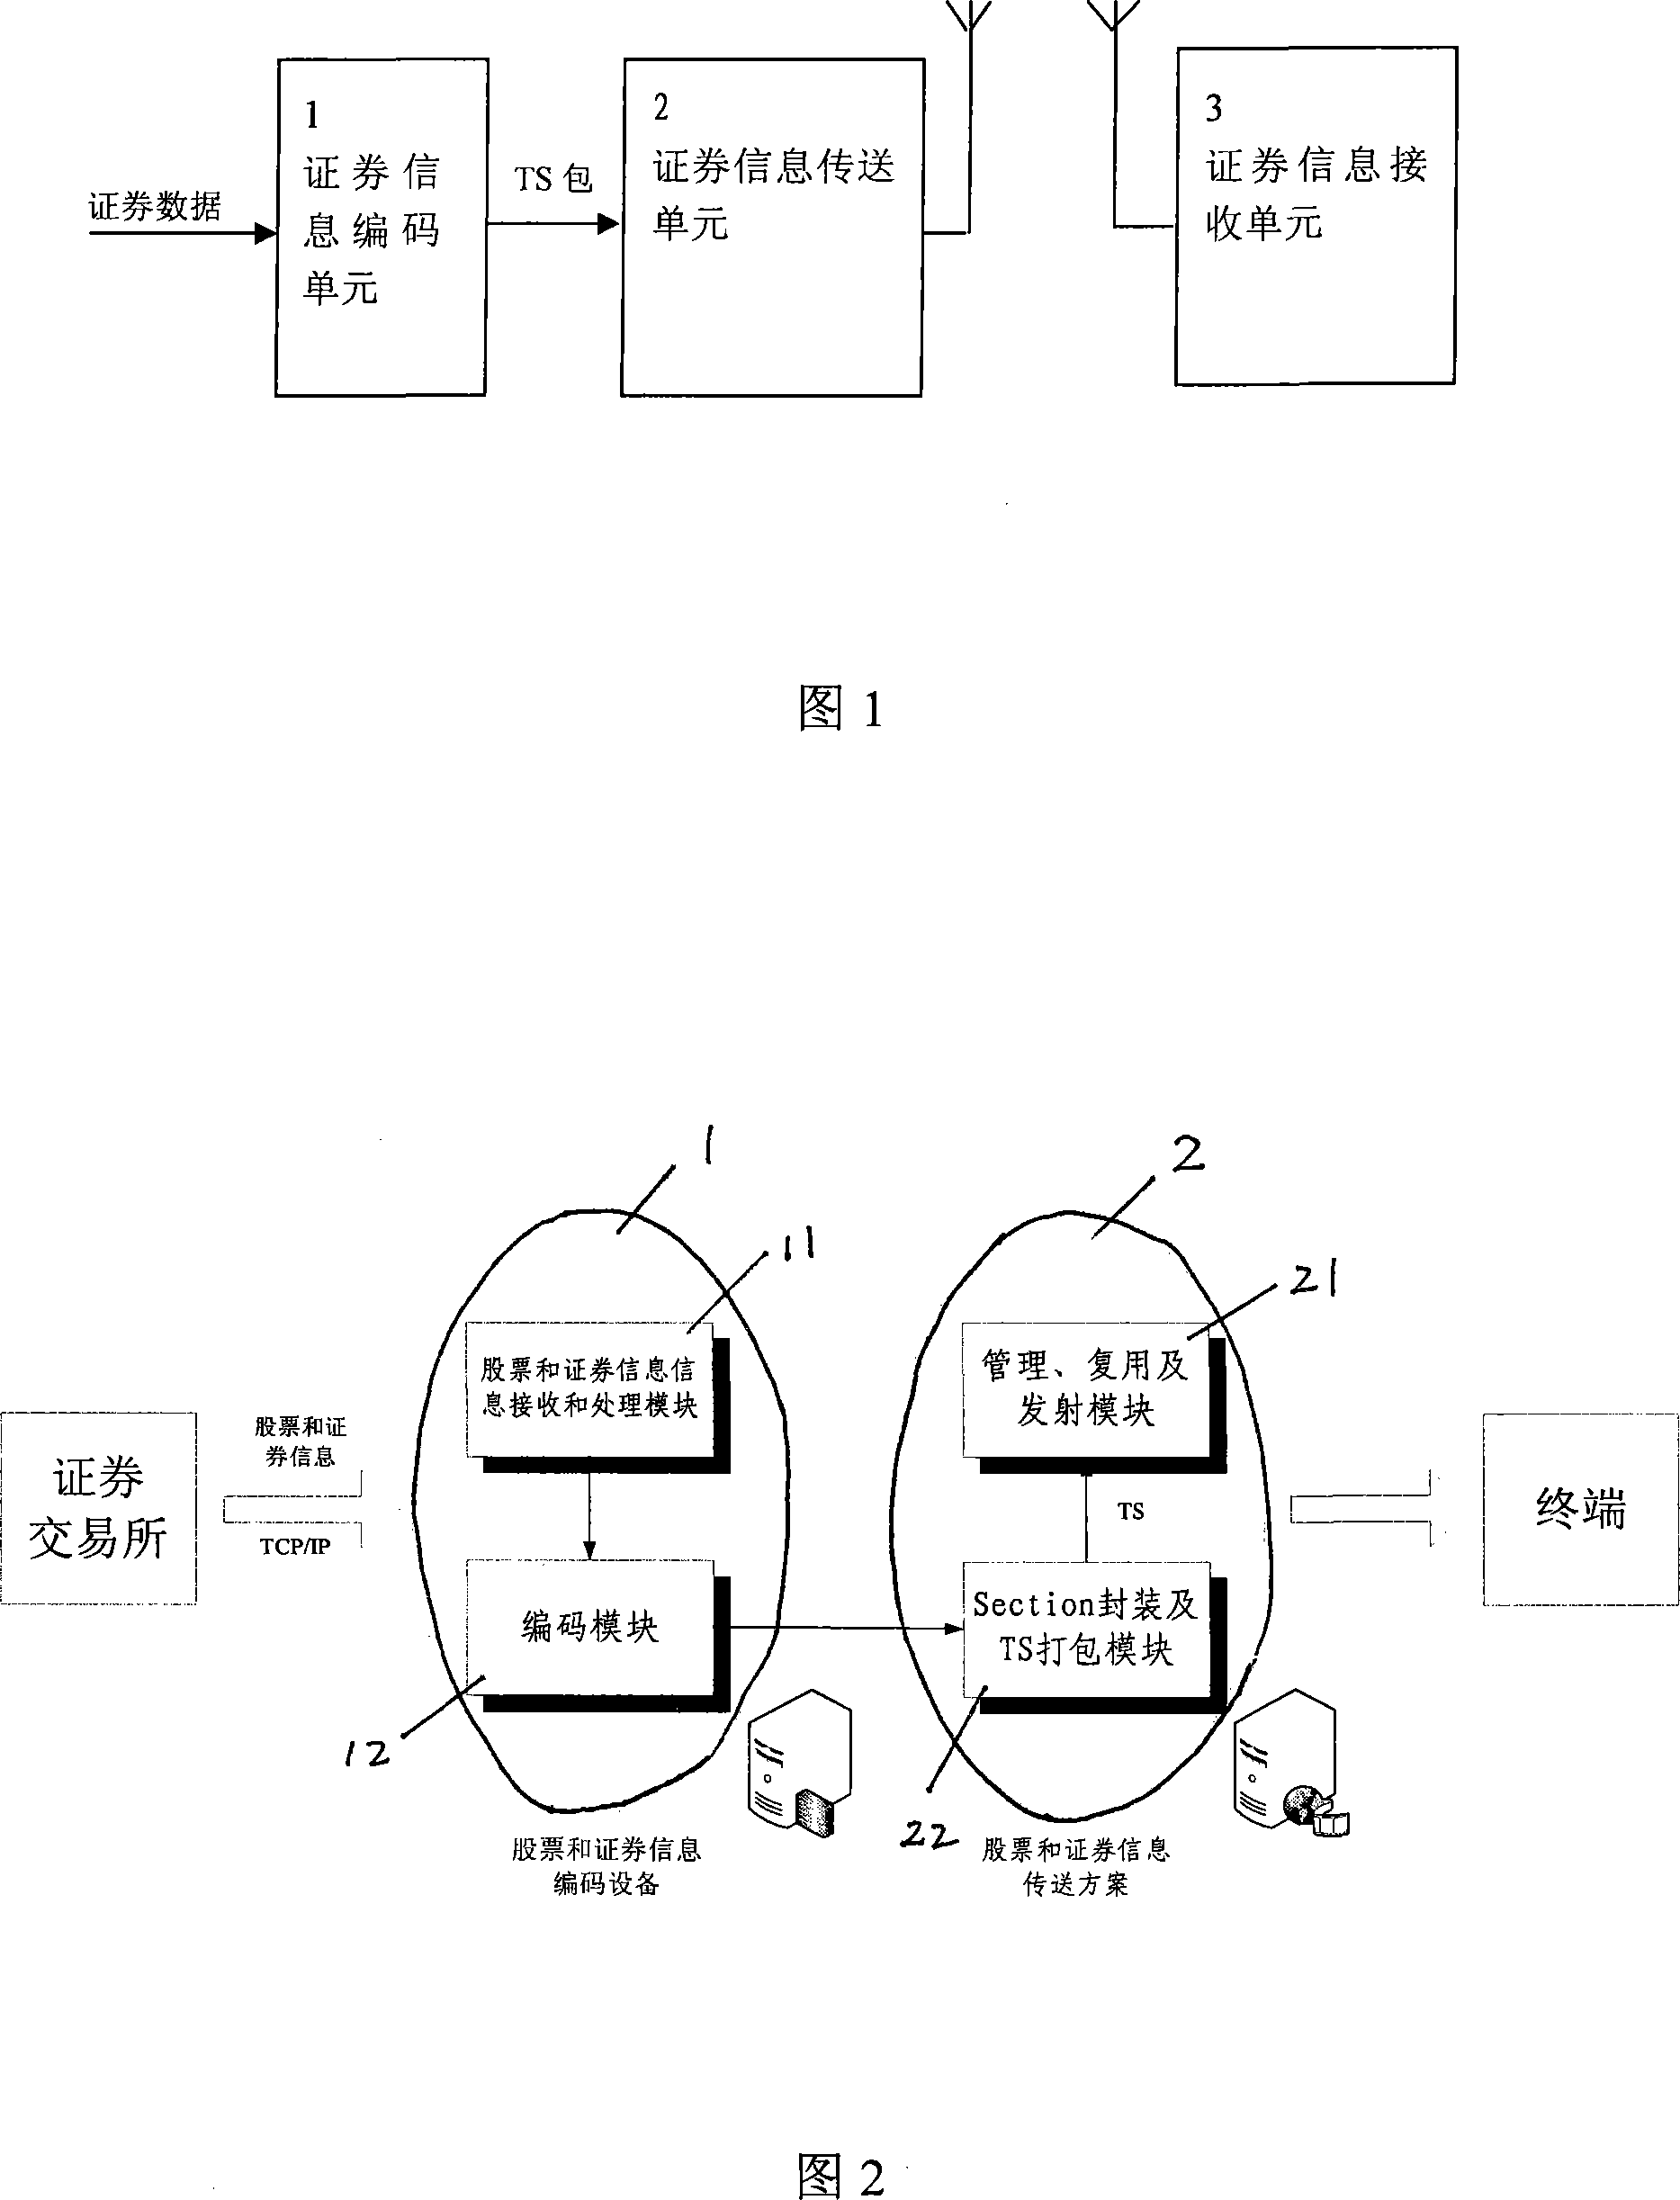 Method and system for transmitting stock information through one-way digital TV network